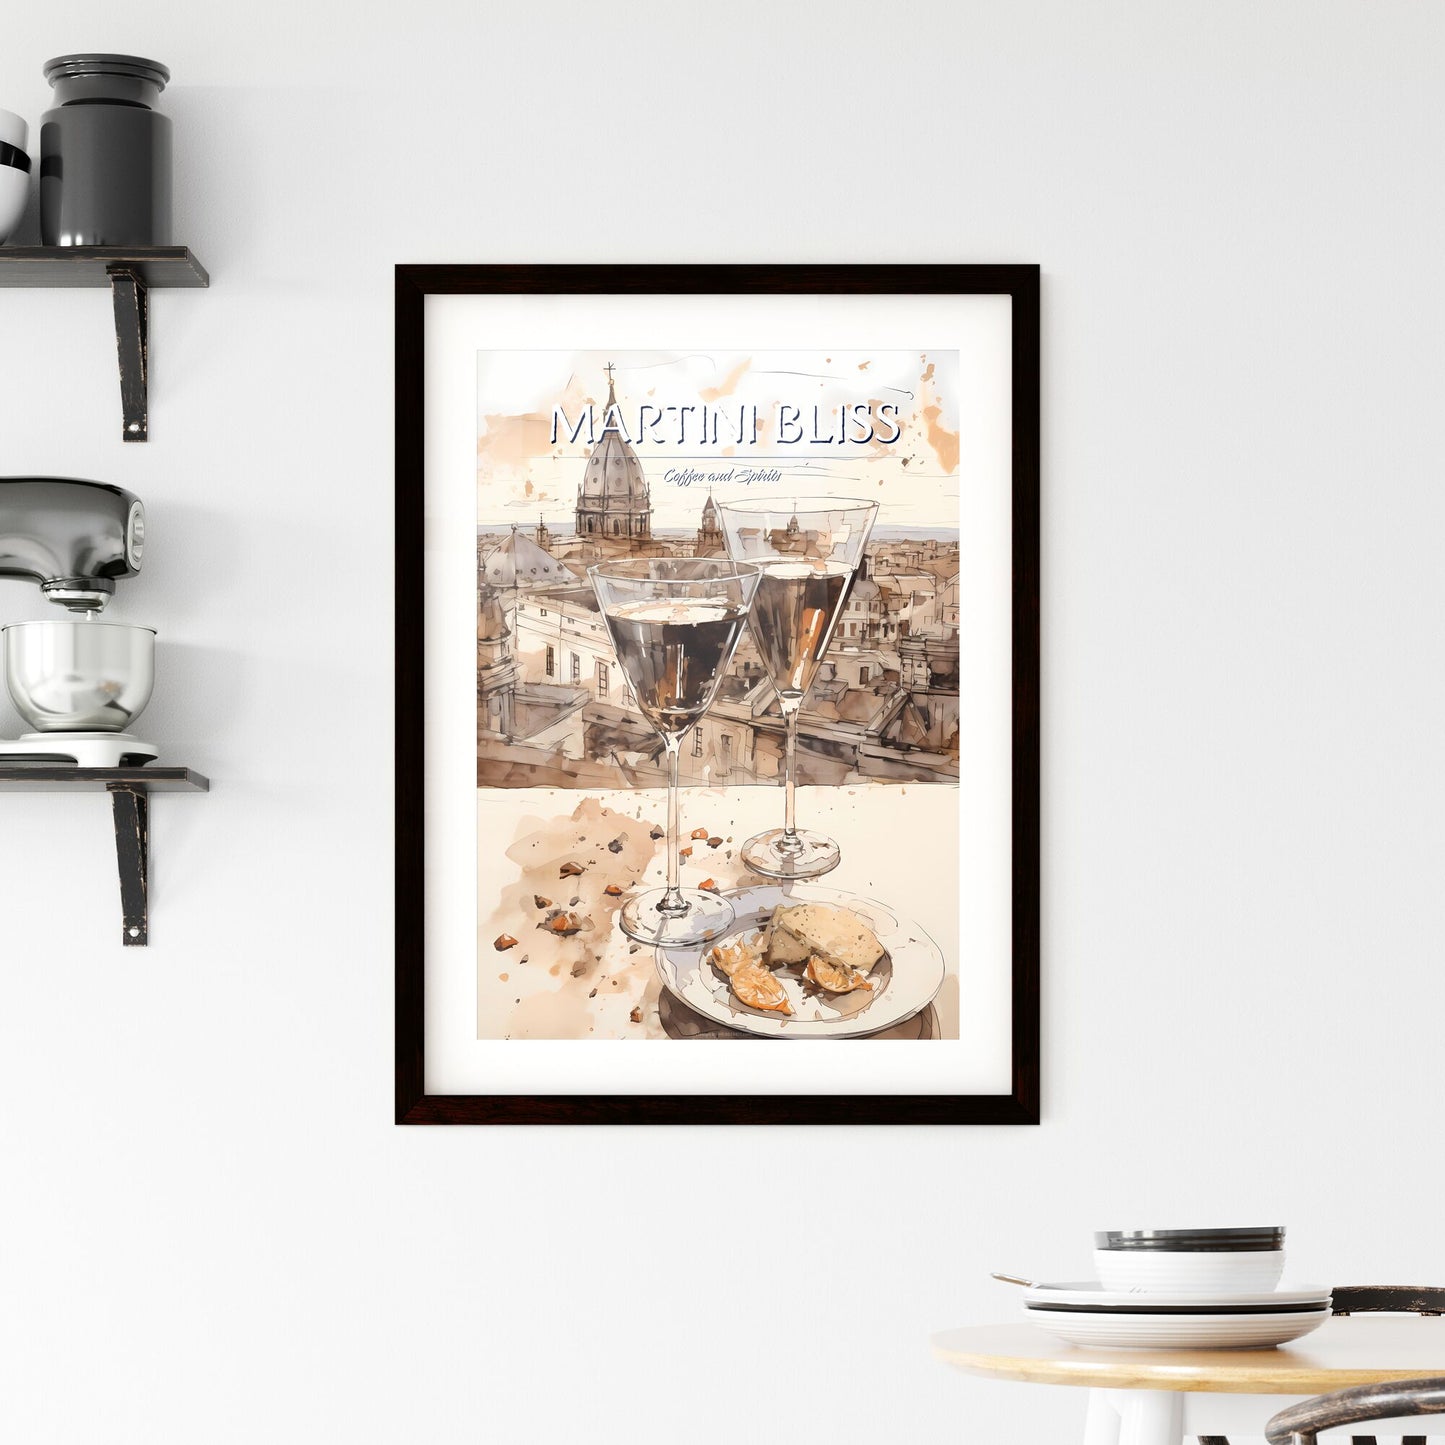 A Poster of Espresso martini - A Pair Of Wine Glasses On A Table With A City In The Background Default Title